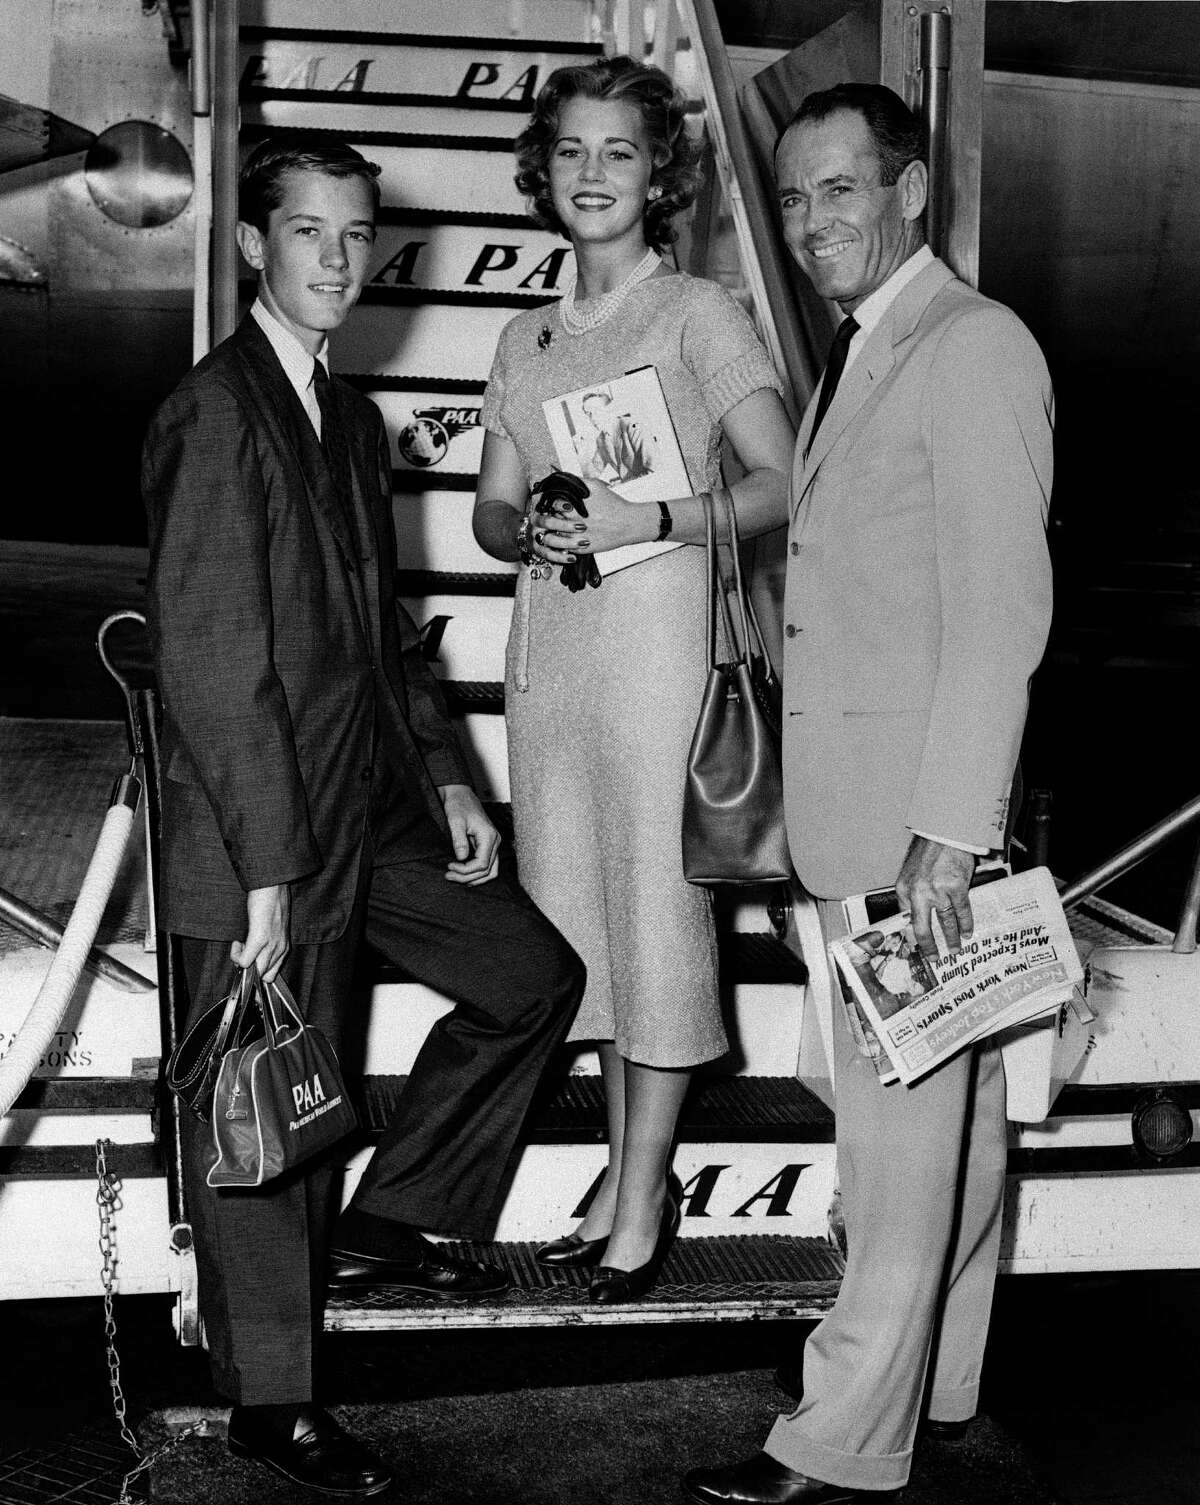 FILE - In this June 25, 1957 file photo, movie actor Henry Fonda, right, with his children, Jane and Peter, are shown at New York International Airport. (AP Photo, File) Photo: Uncredited